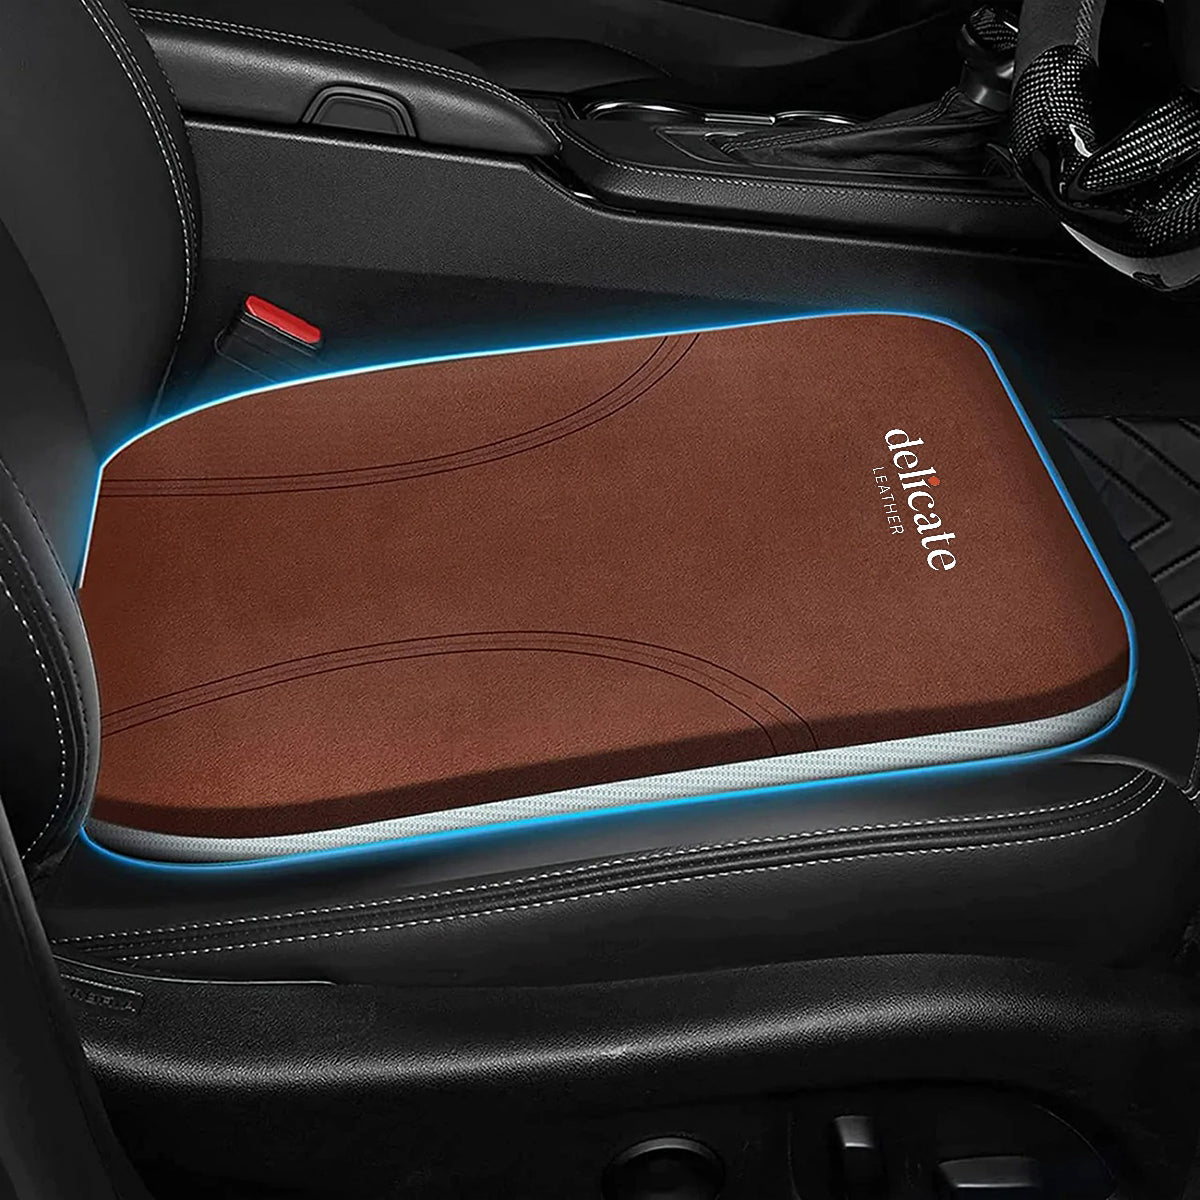 Lincoln Car Seat Cushion: Enhance Comfort and Support for Your Drive